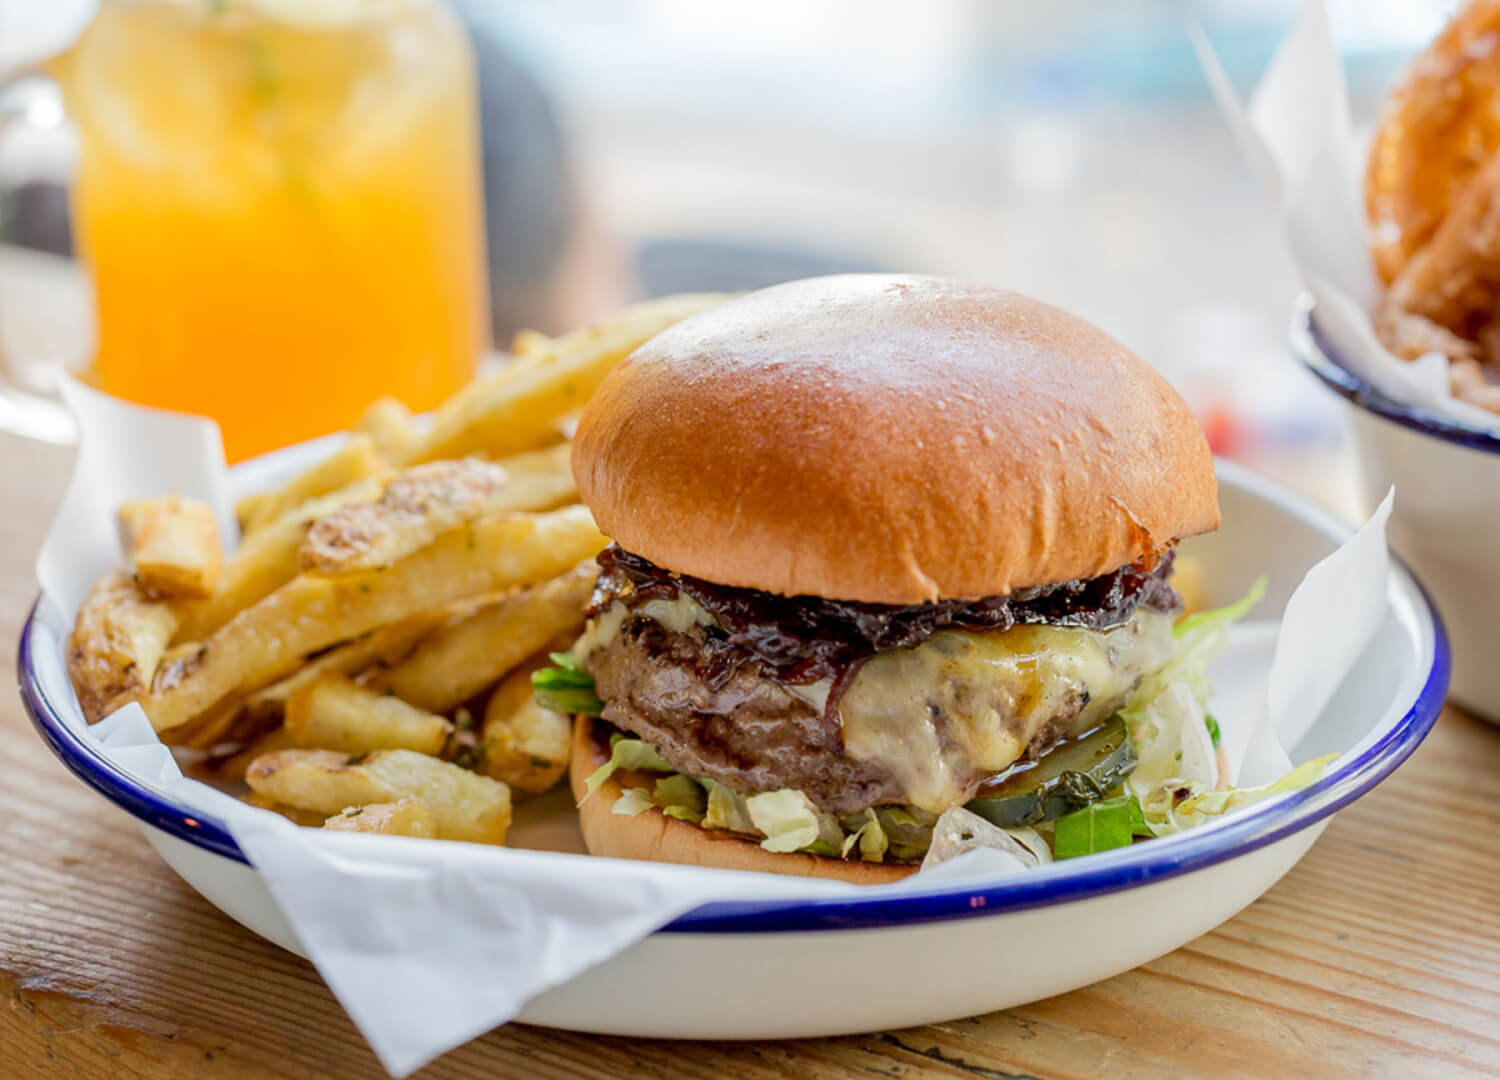 We're just being Honest - really great burgers